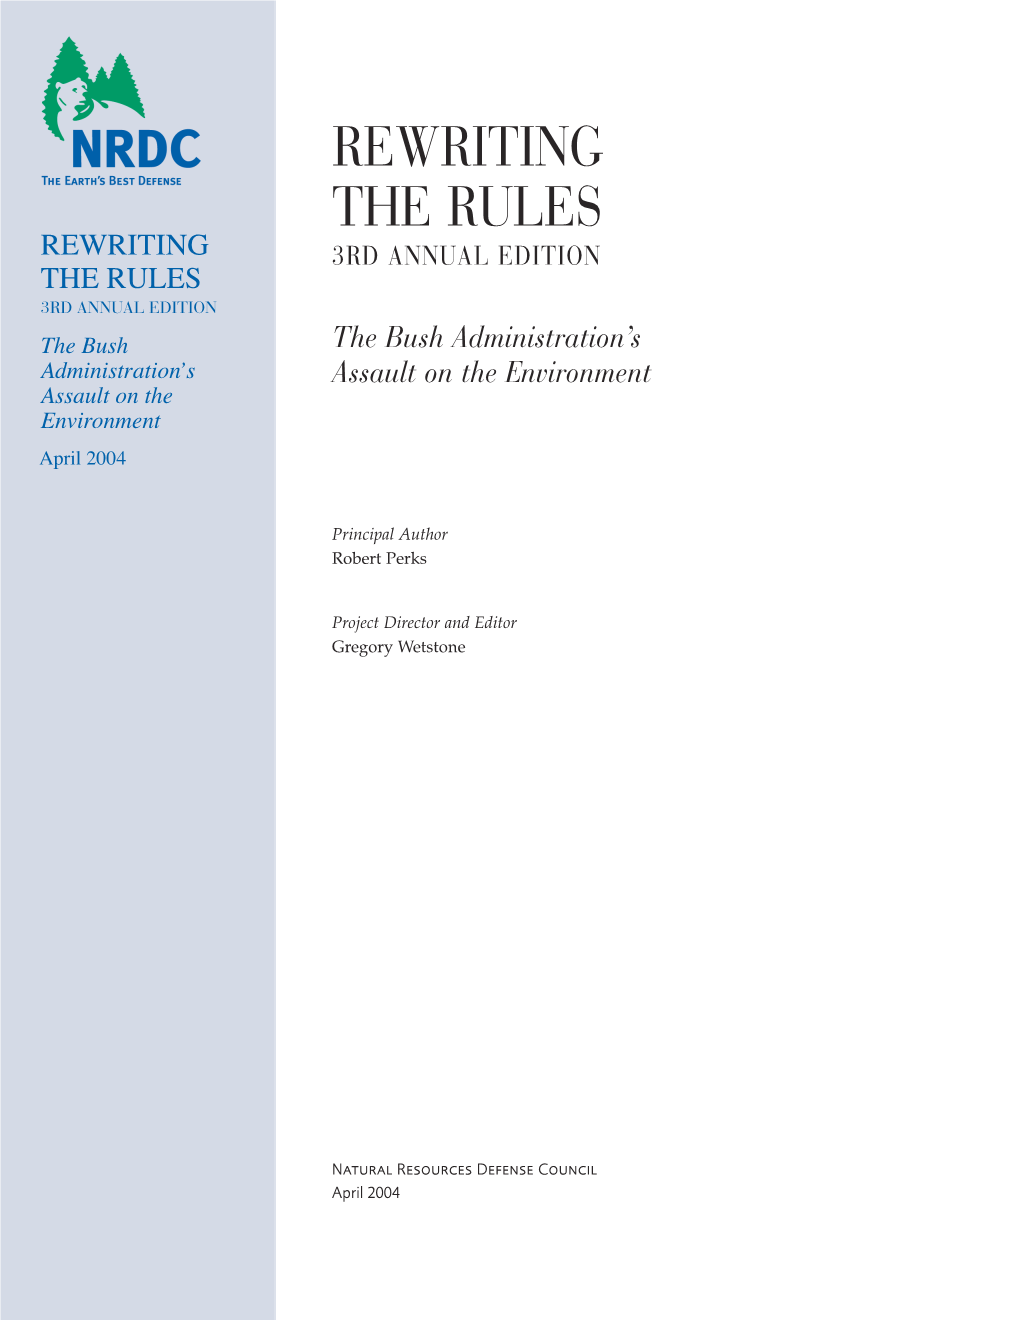 Rewriting the Rules, April 2004 Edition